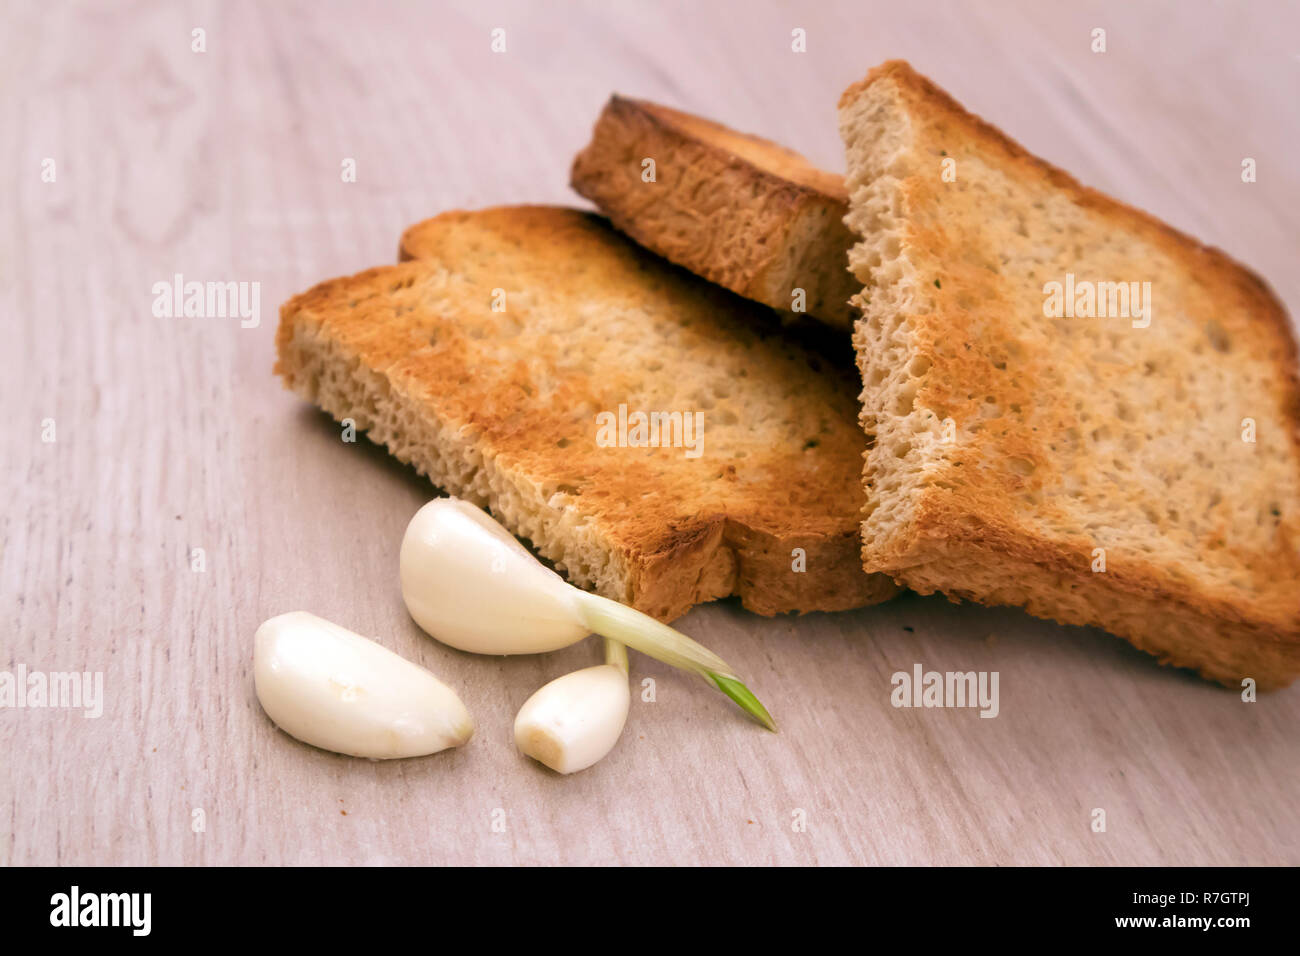 Toasted bread slices with appetite crispy crust and few garlic cloves on wooden board Stock Photo